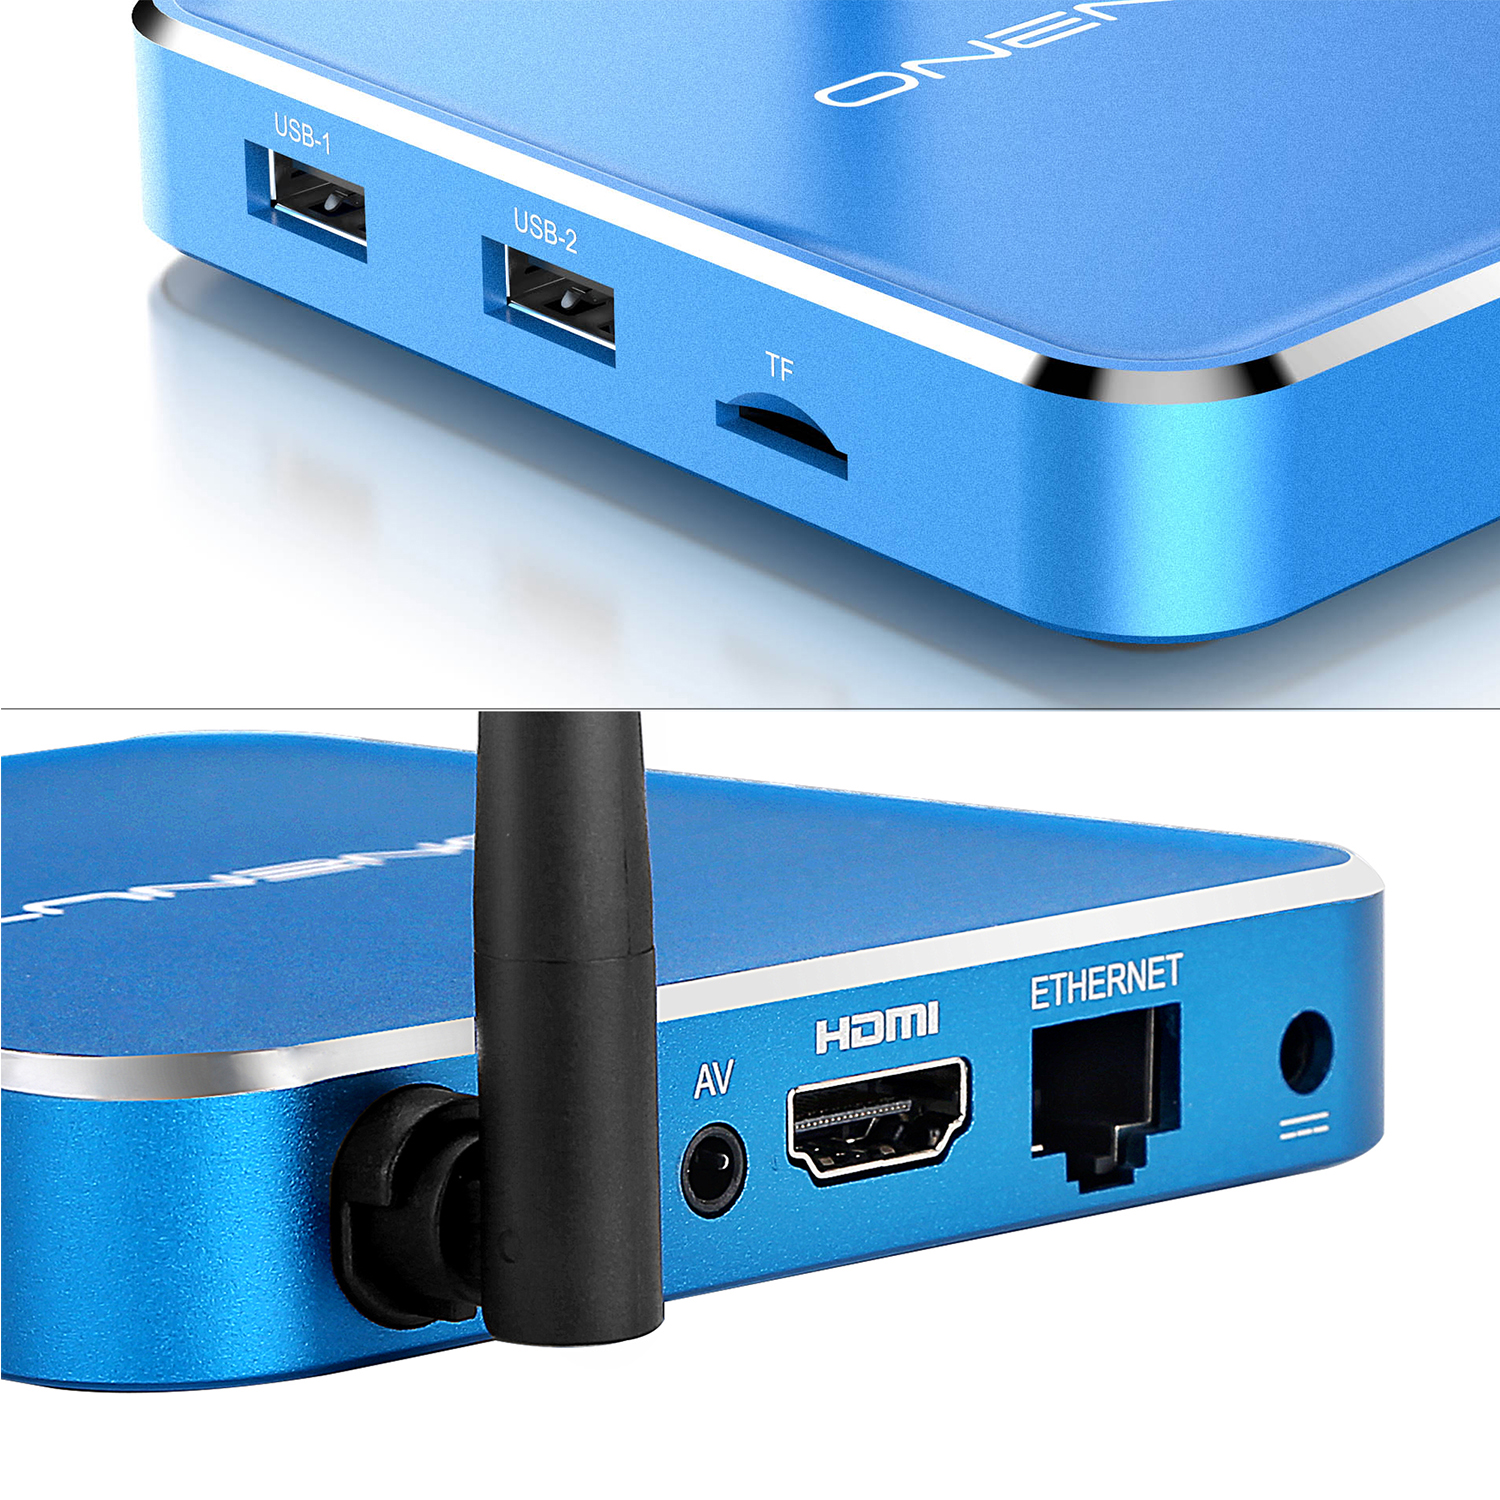 OEM Android TV Box Suppliers,Best Android TV Box HDMI,Bluetooth 4.0 Android Smart TV Box